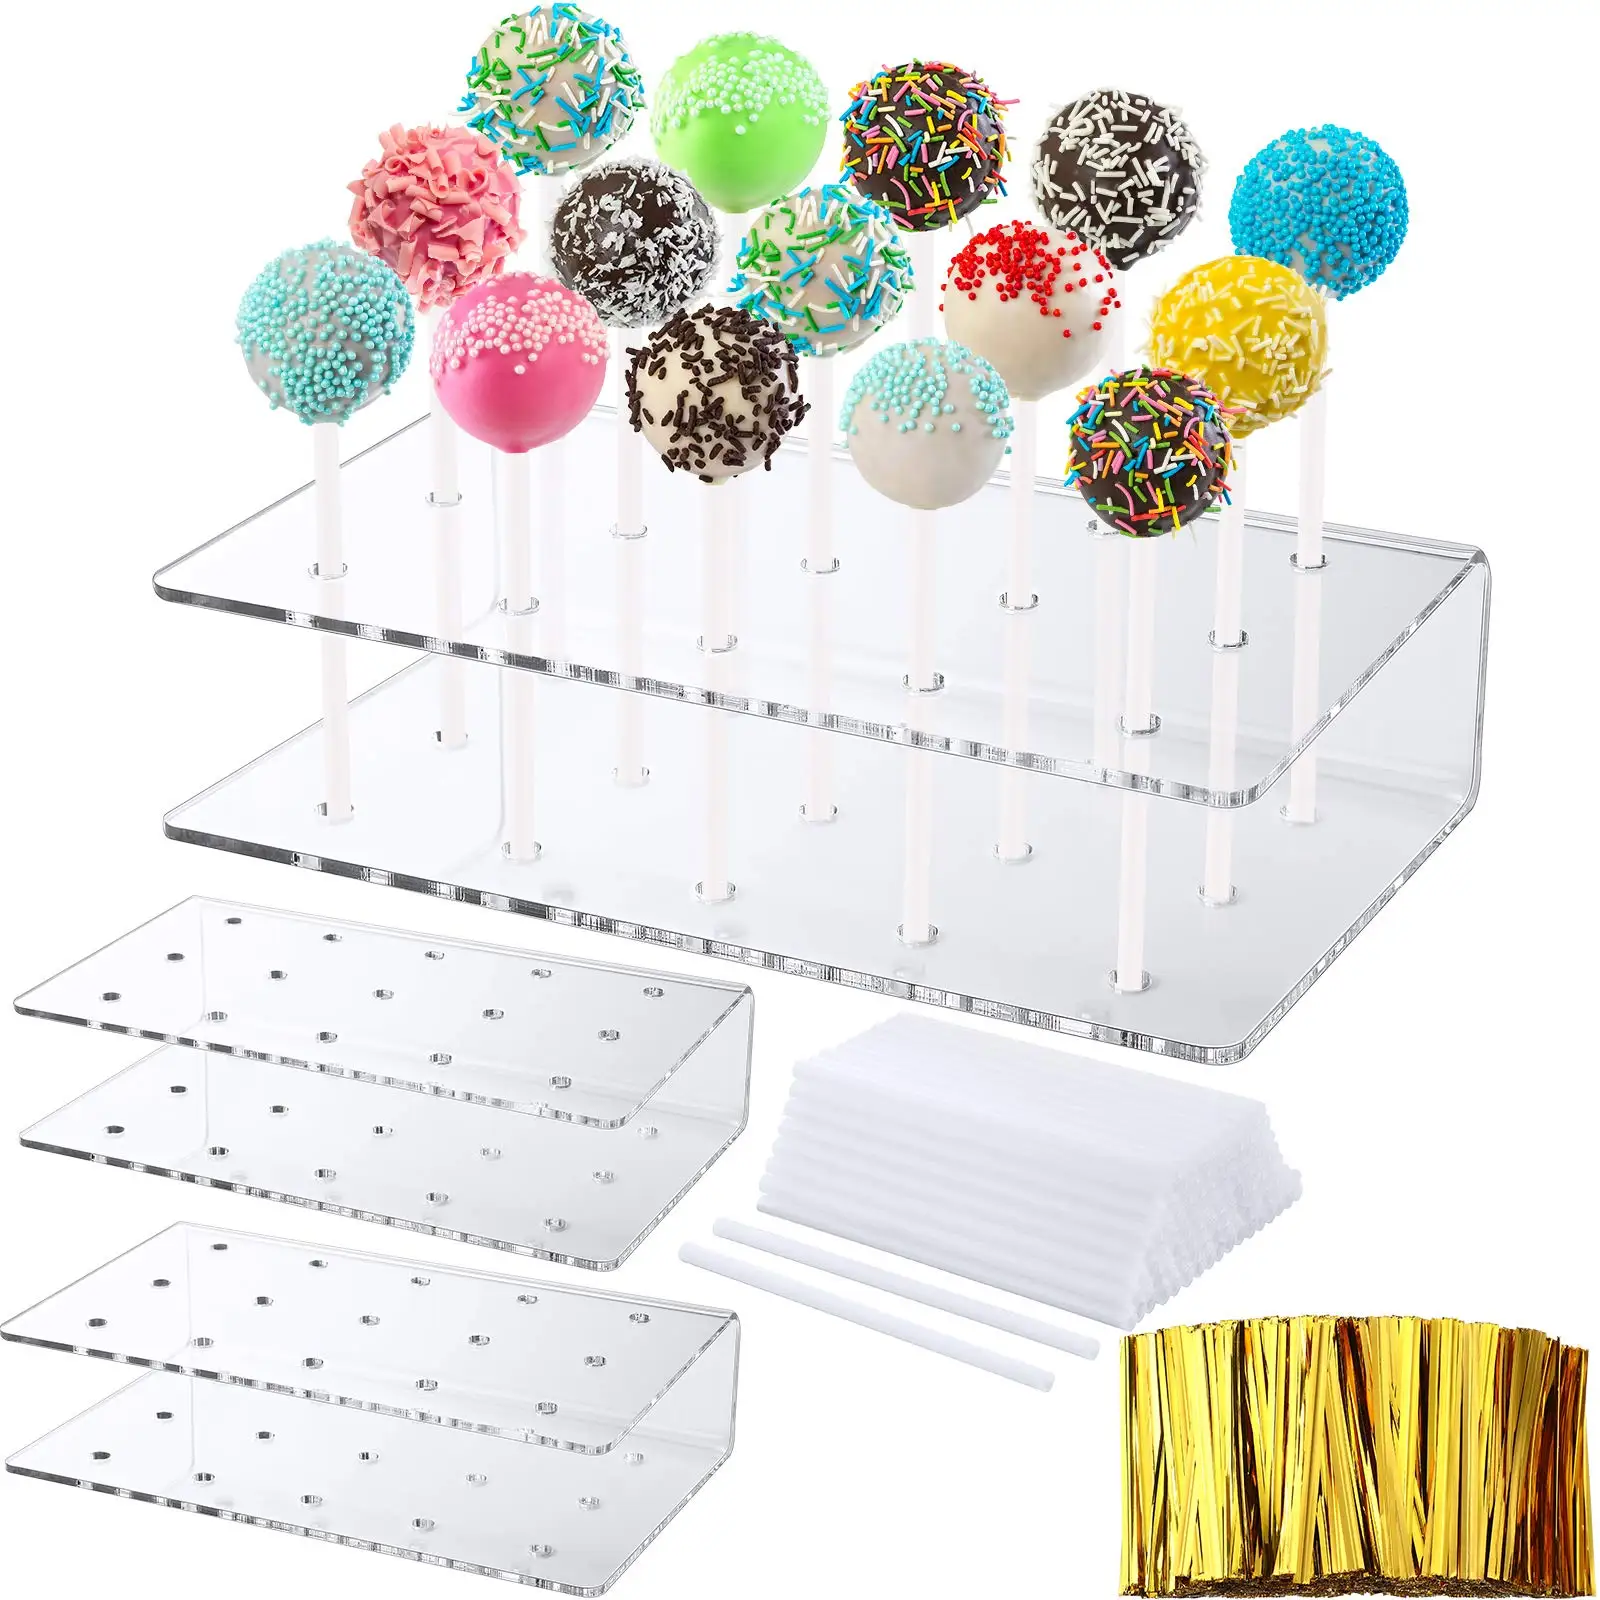 

Tailai Acrylic Cake Pop Stand 15 Holes Clear Lollipop Holder Stand with Lollipop Treat Sticks Gold Twist Ties for Party